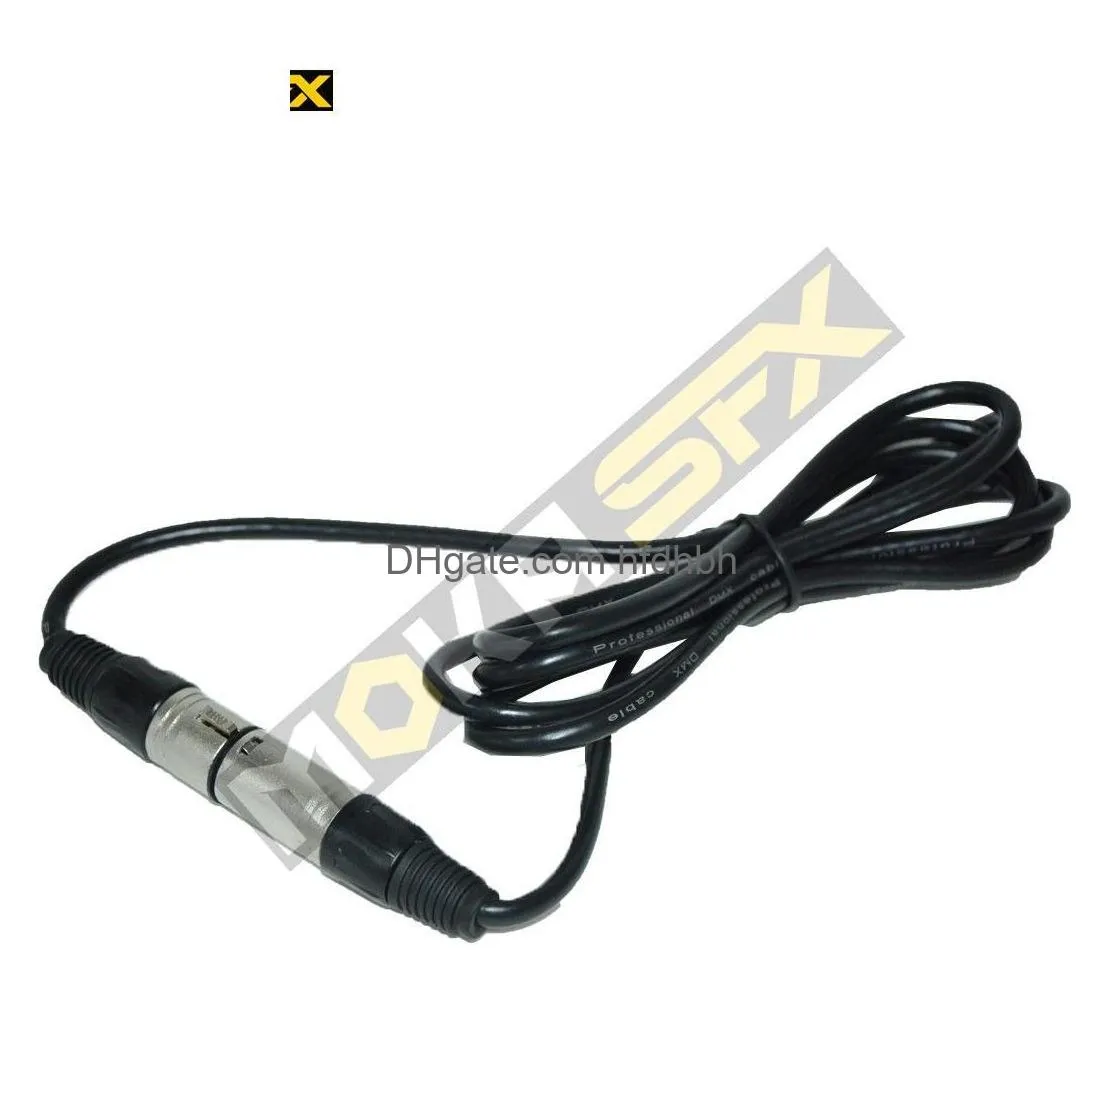  10 pcs/lot 2 meter length 3 pin signal connection dmx cable high speed metal material for stage/ddj/party